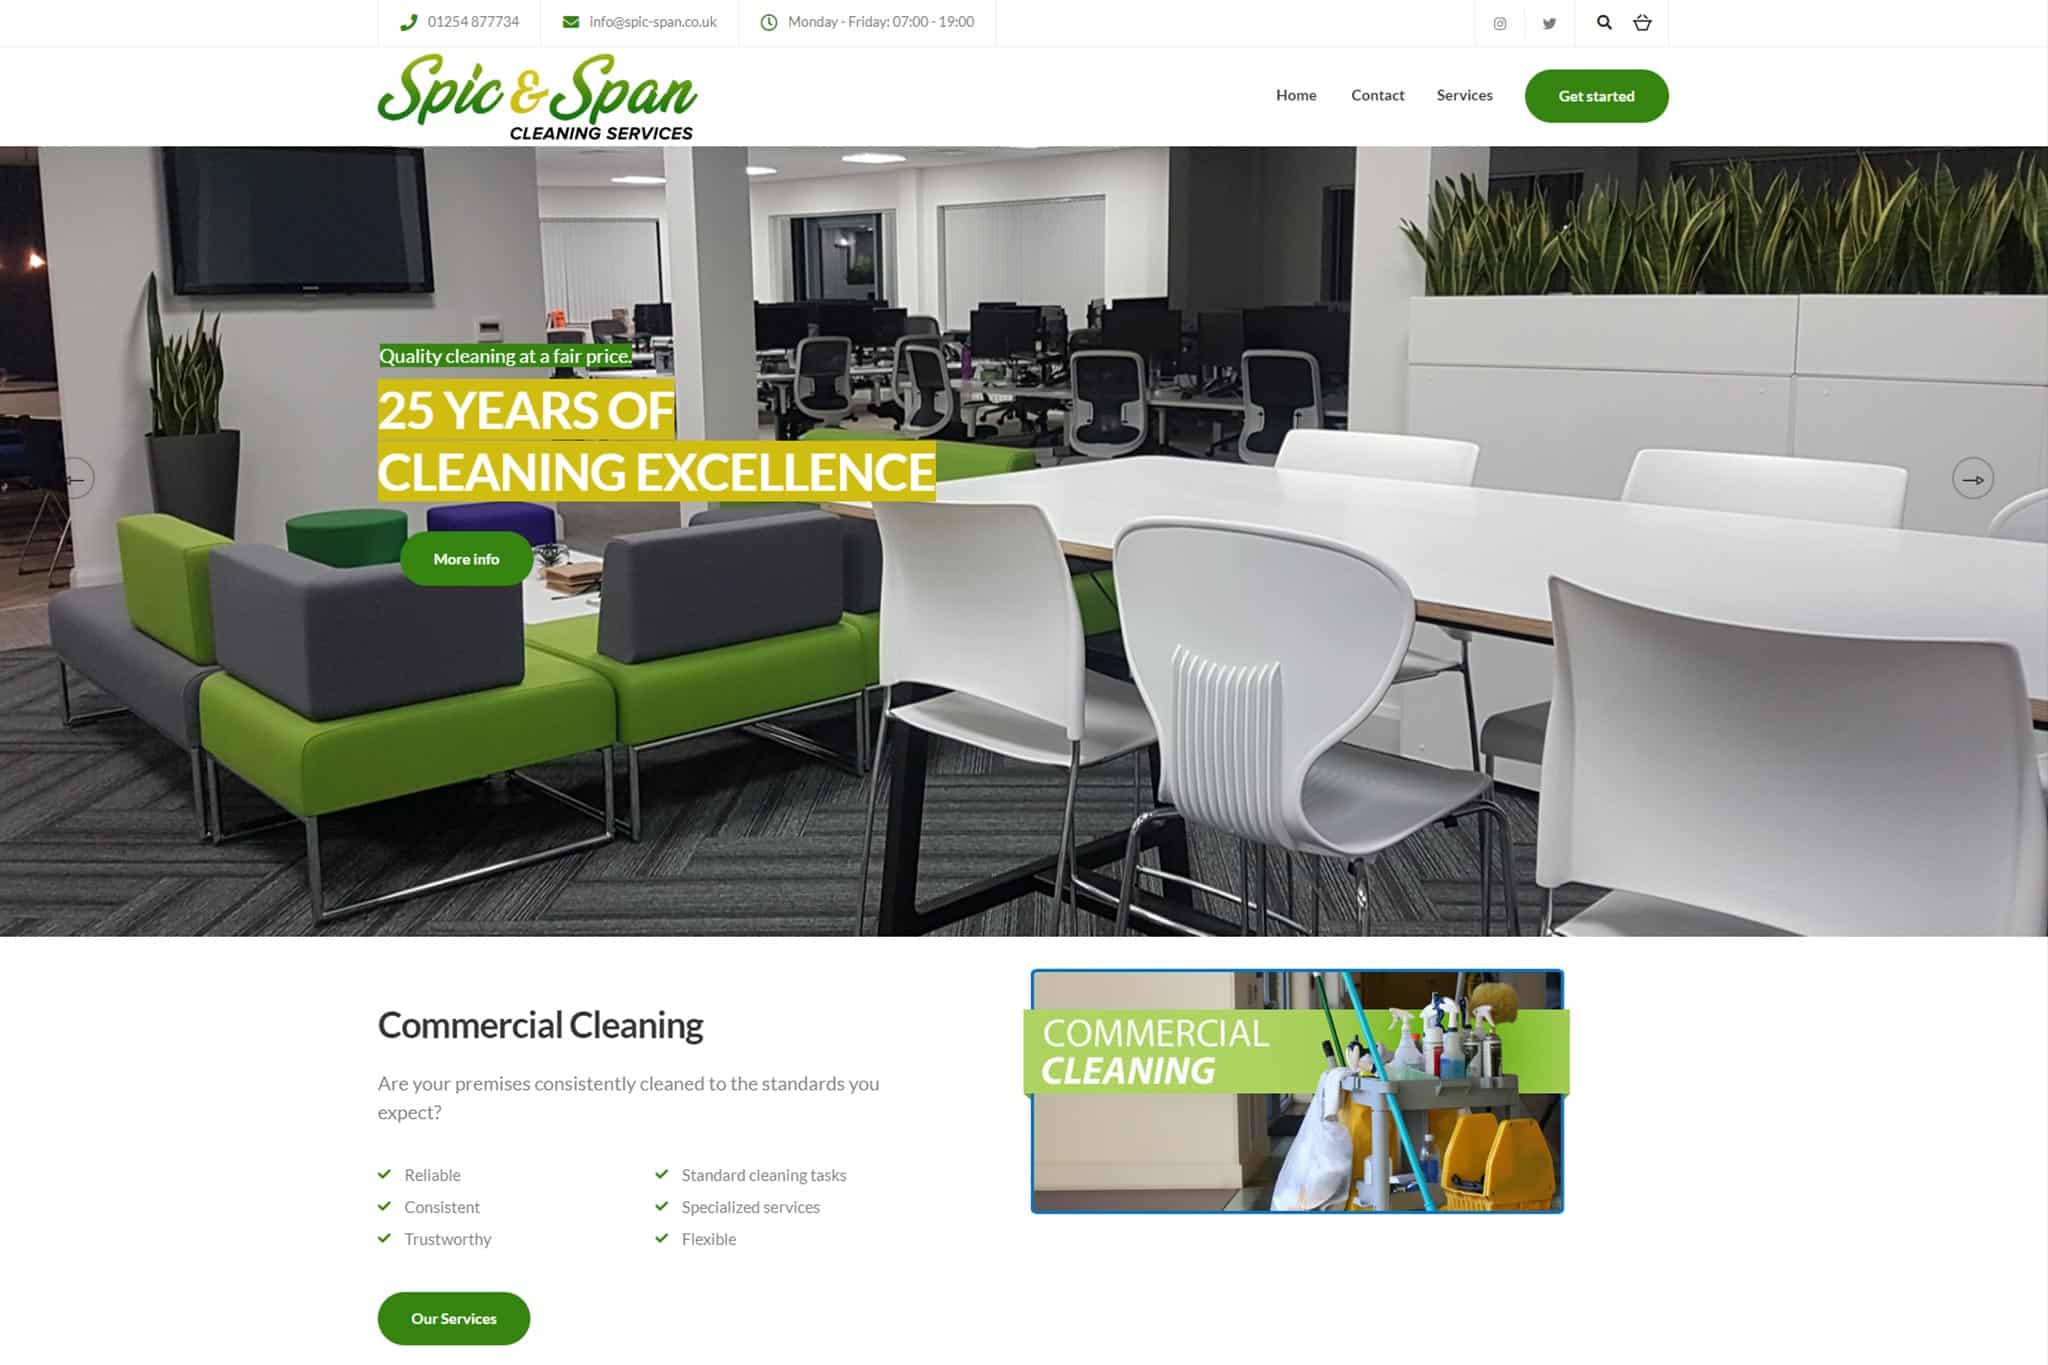 Spic and Span Cleaning Services Lancashire website example by DexCloud